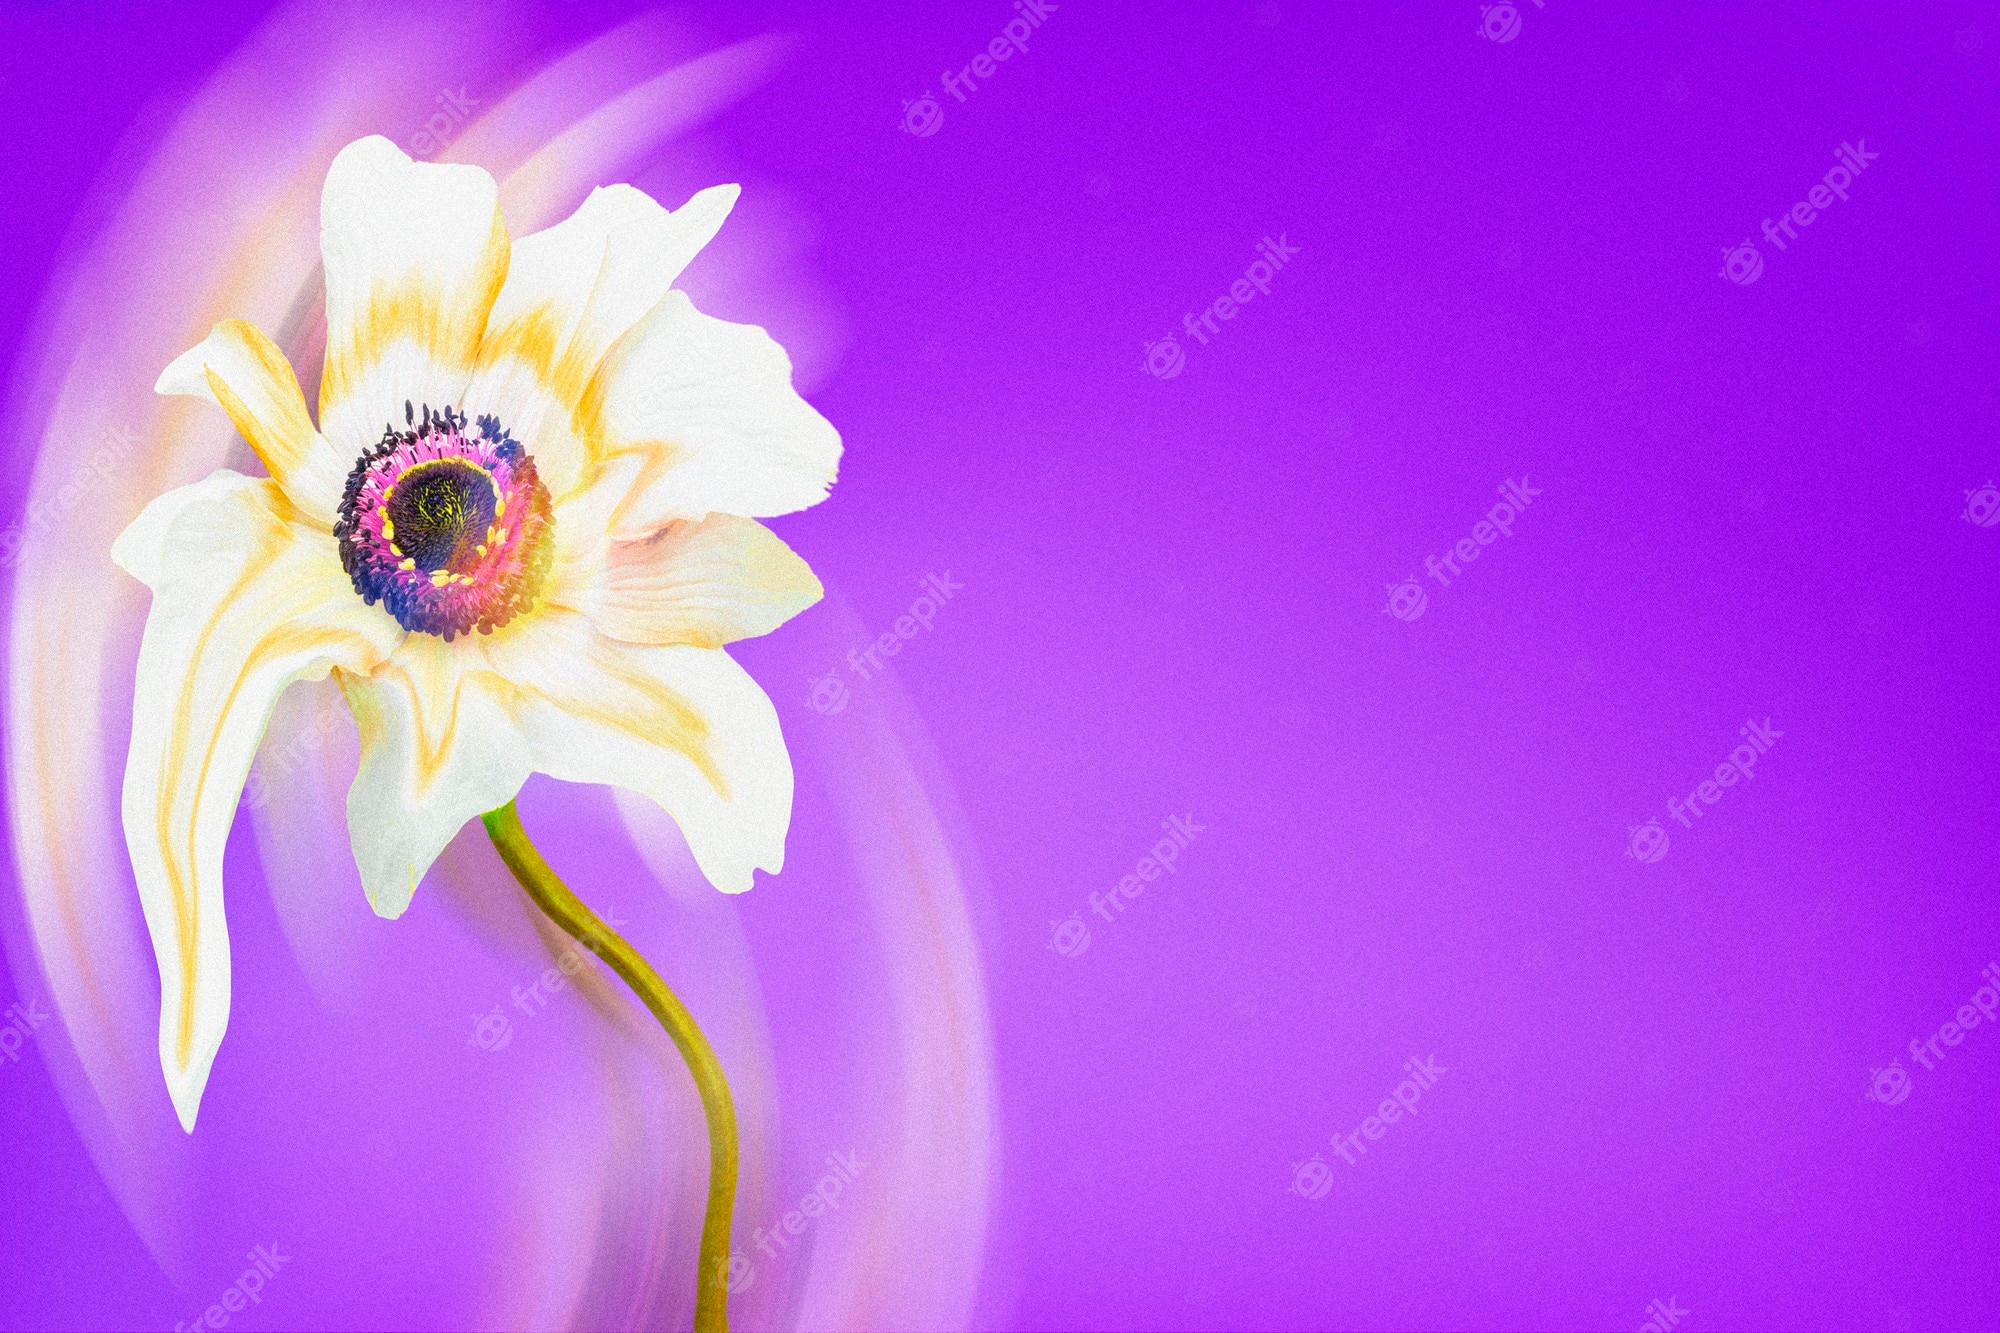 Free photo aesthetic background purple wallpaper white anemone flower trippy abstract design